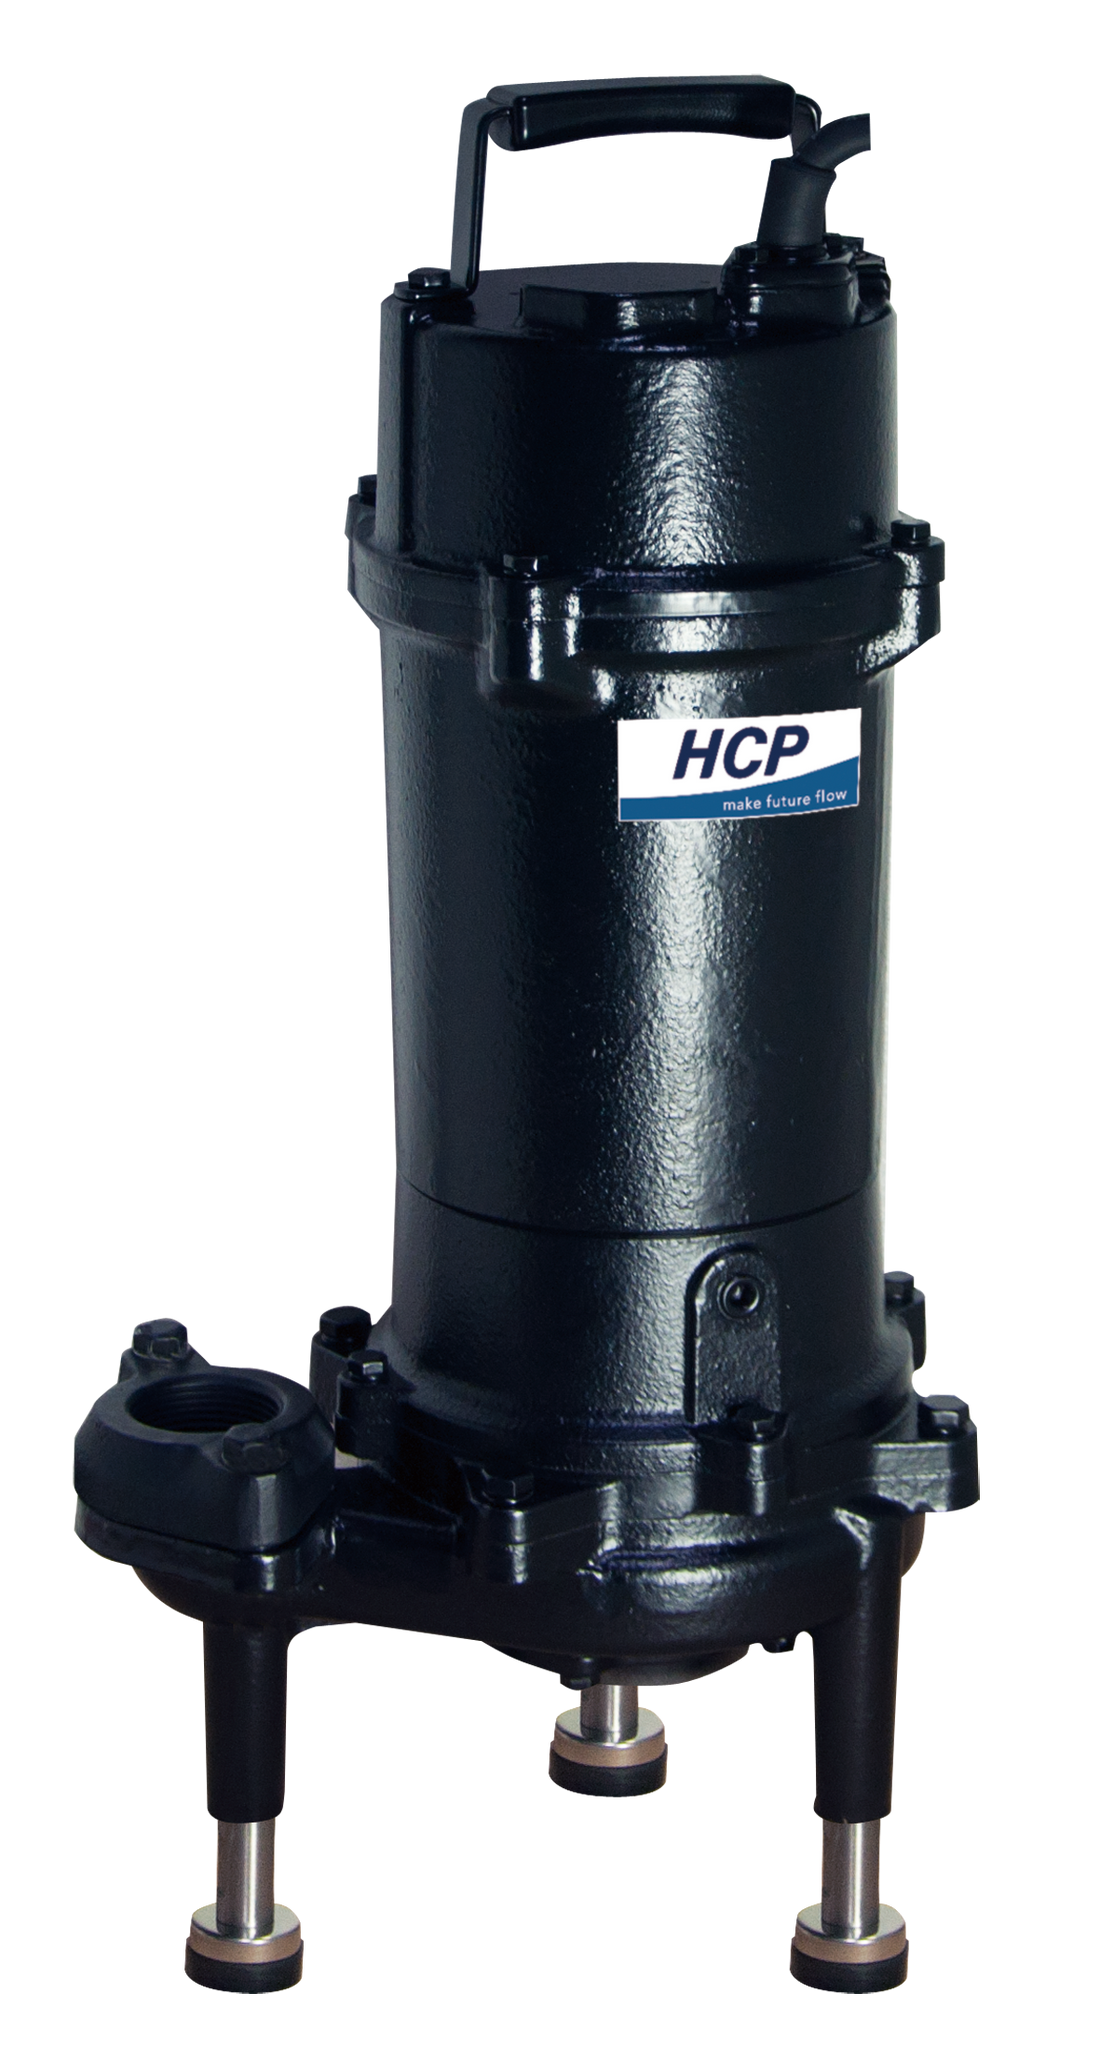 HCP High-Performance Cast Iron Industrial Sewage Grinder Pumps